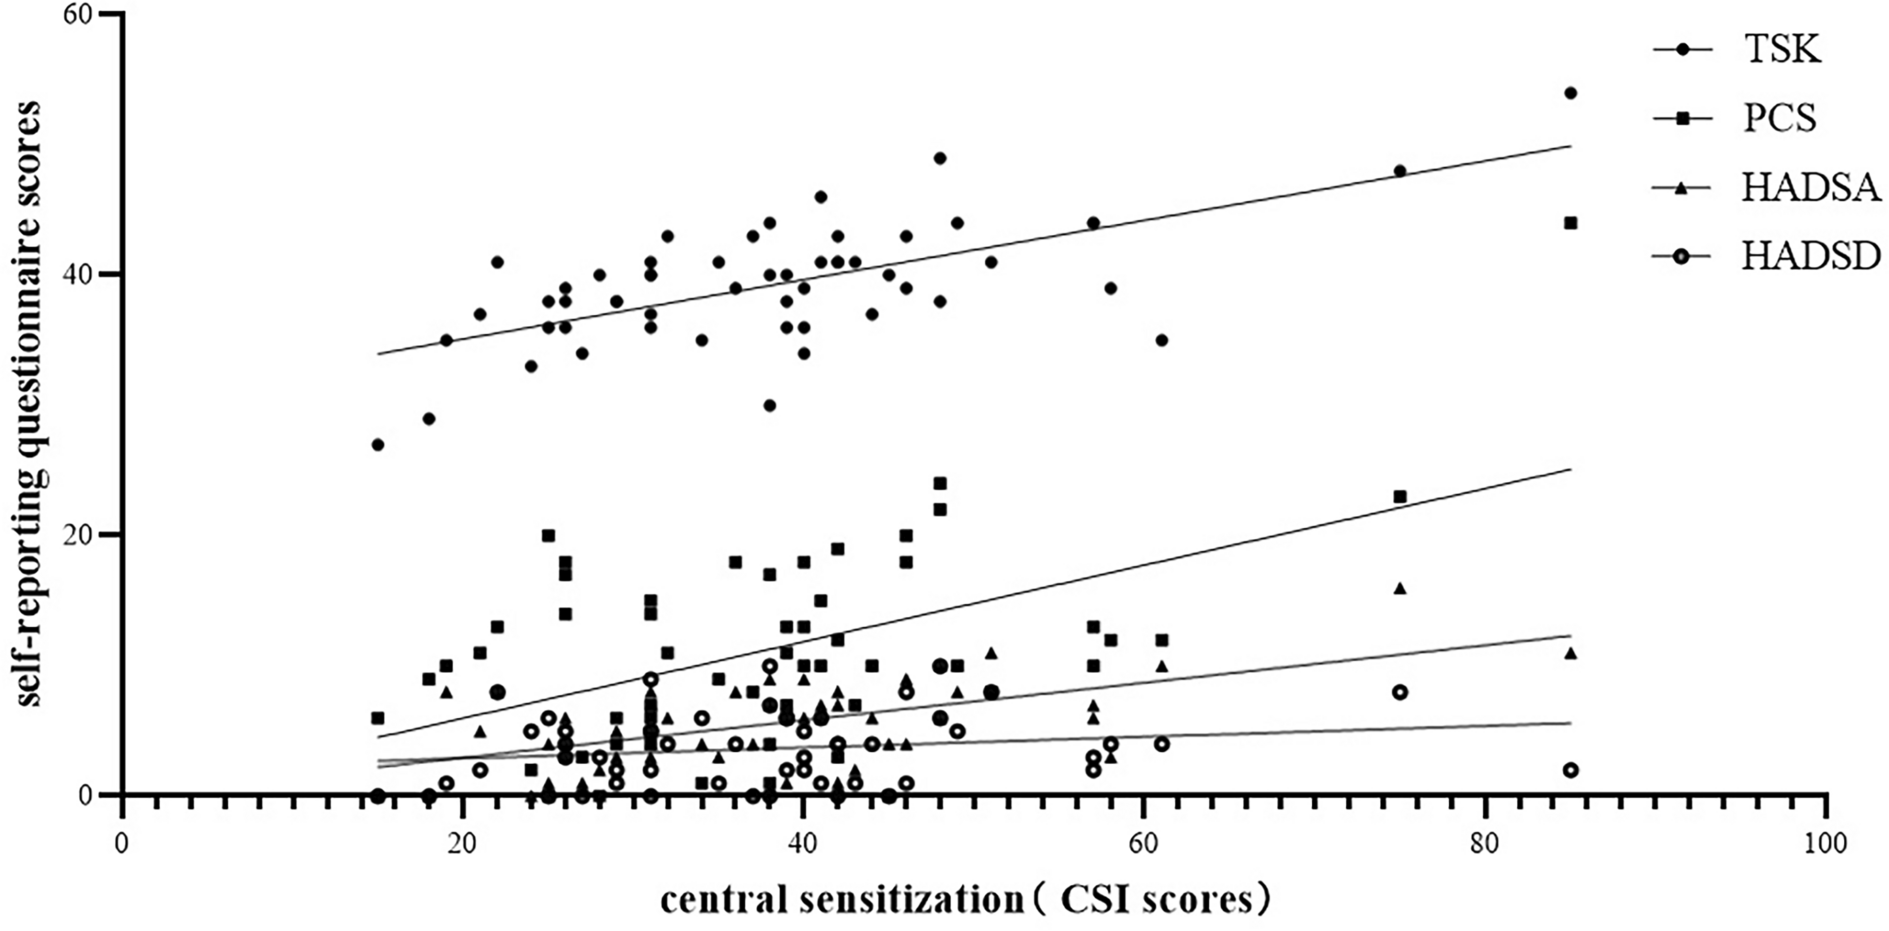 Correlations of The Central Sensitization Inventory, conditioned pain modulation, cognitions and psychological factors in individuals with chronic neck pain: A cross-sectional study